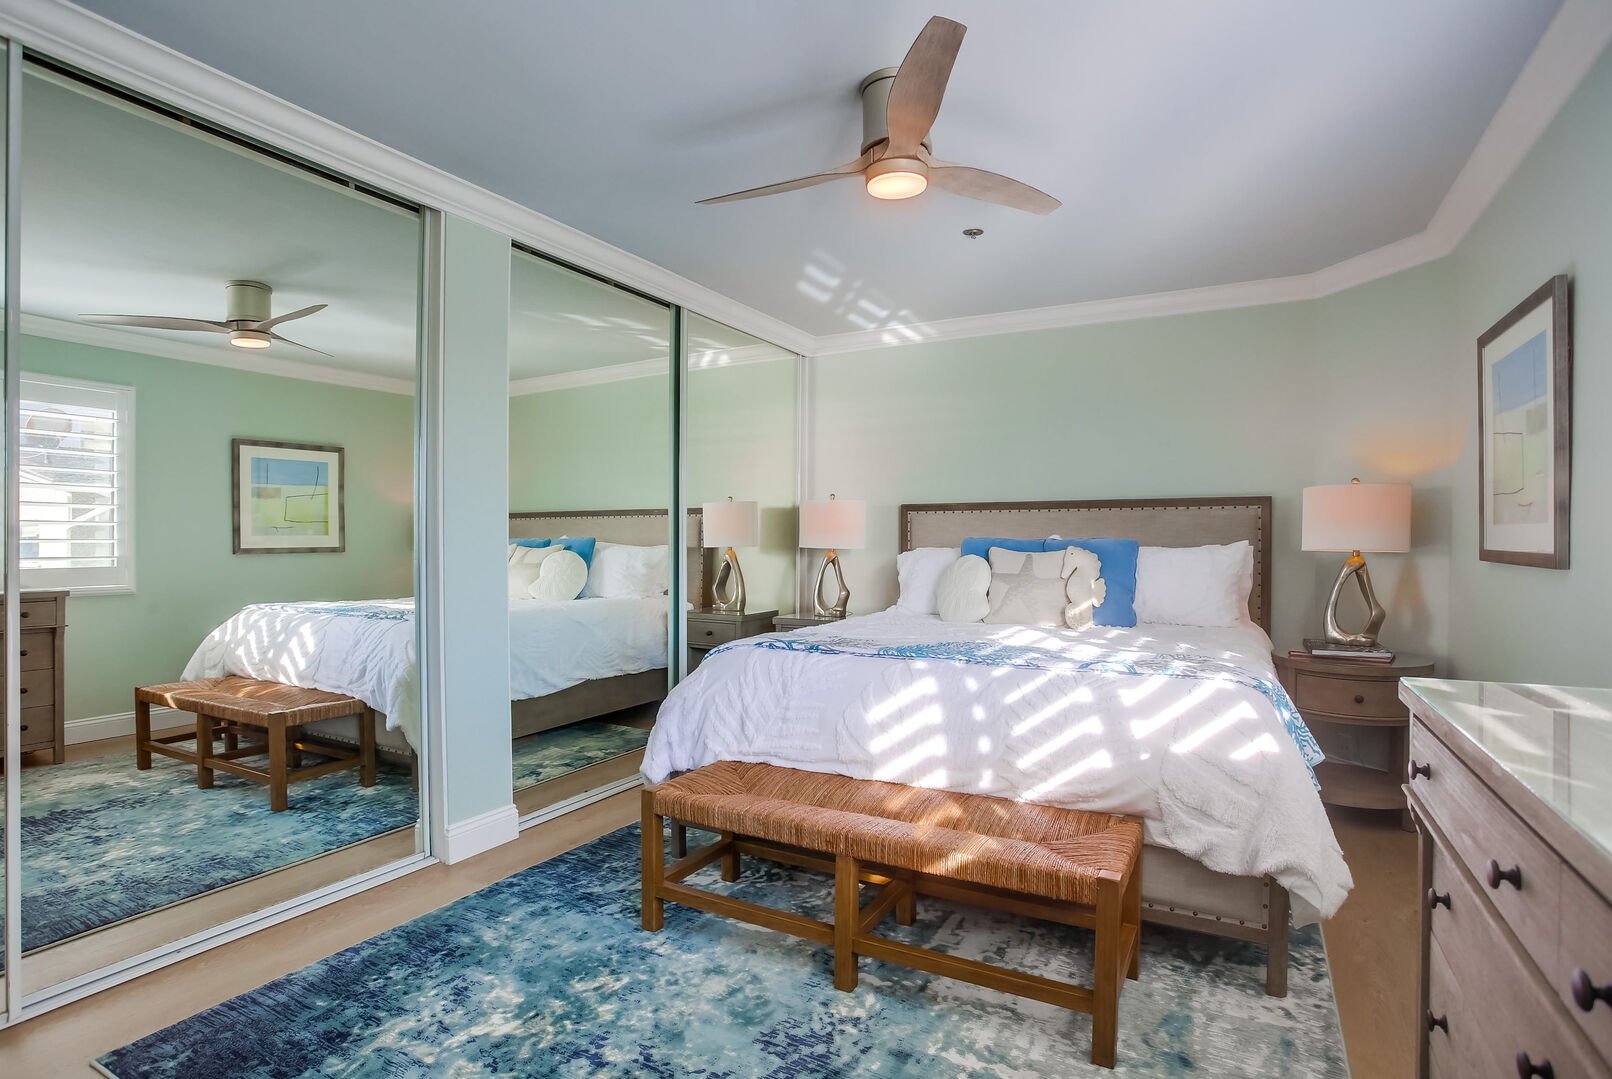 Renovated master bedroom with king bed, mirrored closets, overhead lighting and remote-control fan, new floors, furniture and decor! In-suite/shared bathroom as well